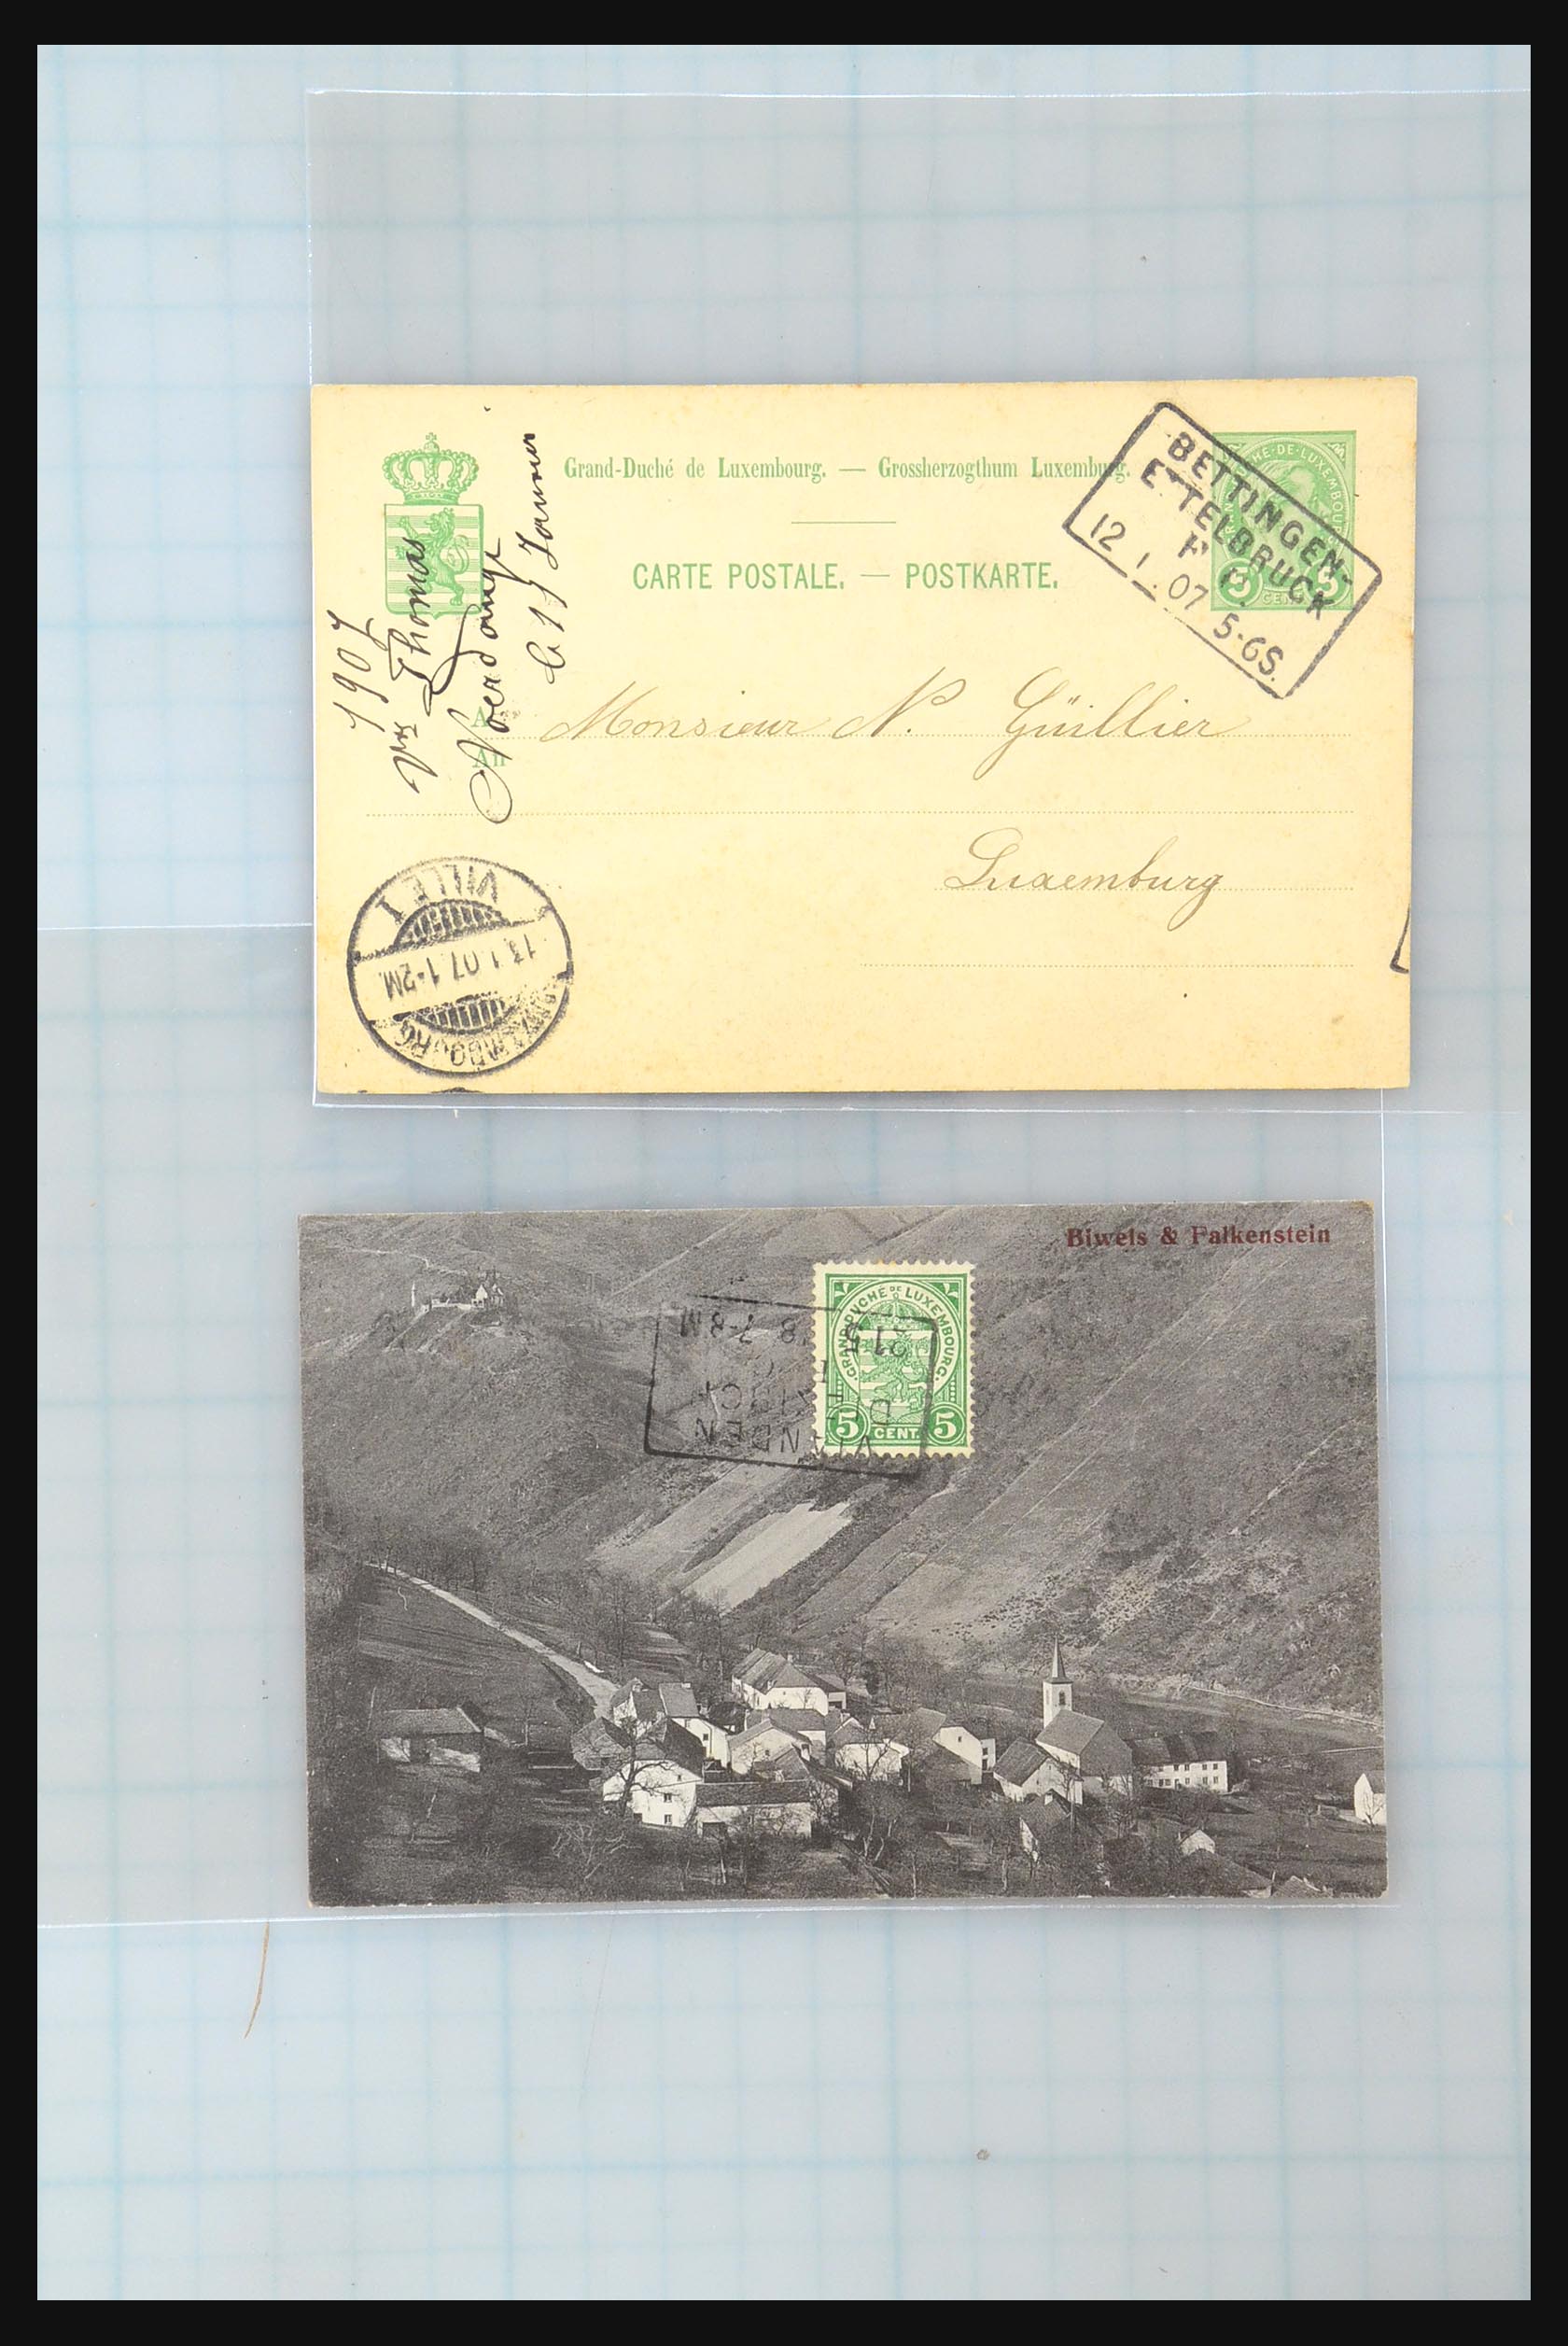 31358 080 - 31358 Portugal/Luxemburg/Greece covers 1880-1960.